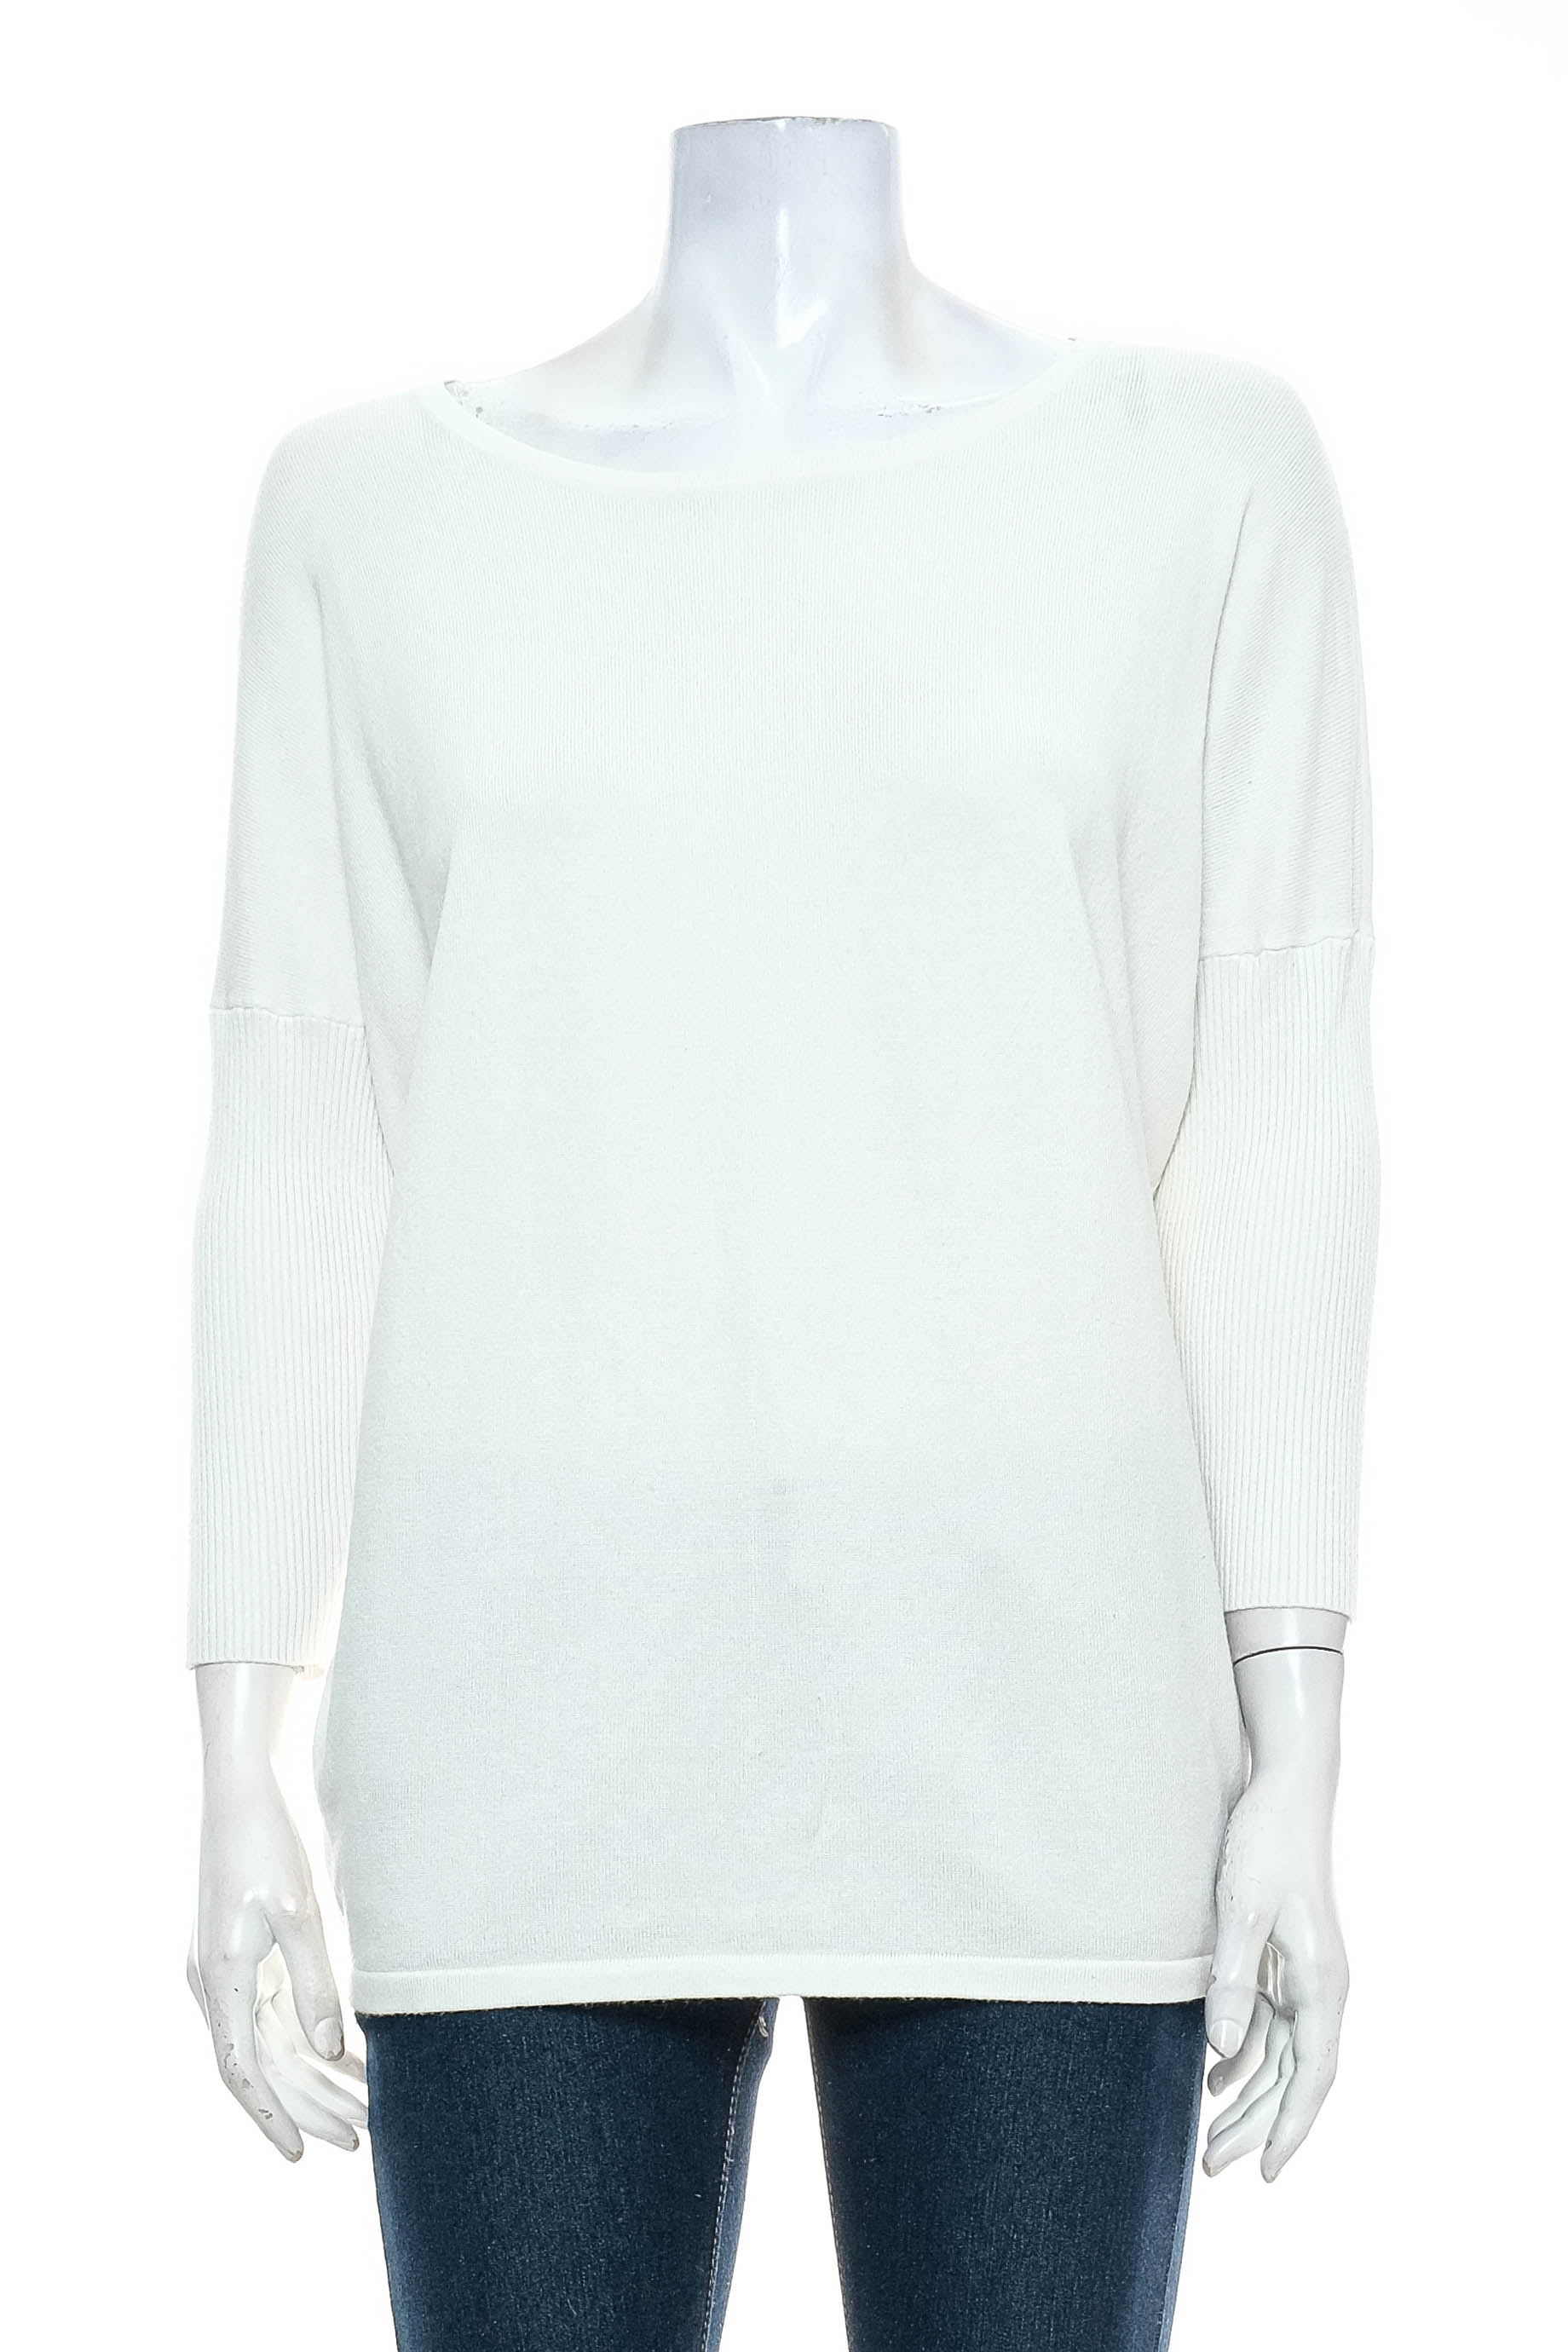 Women's sweater - FREE/QUENT - 0